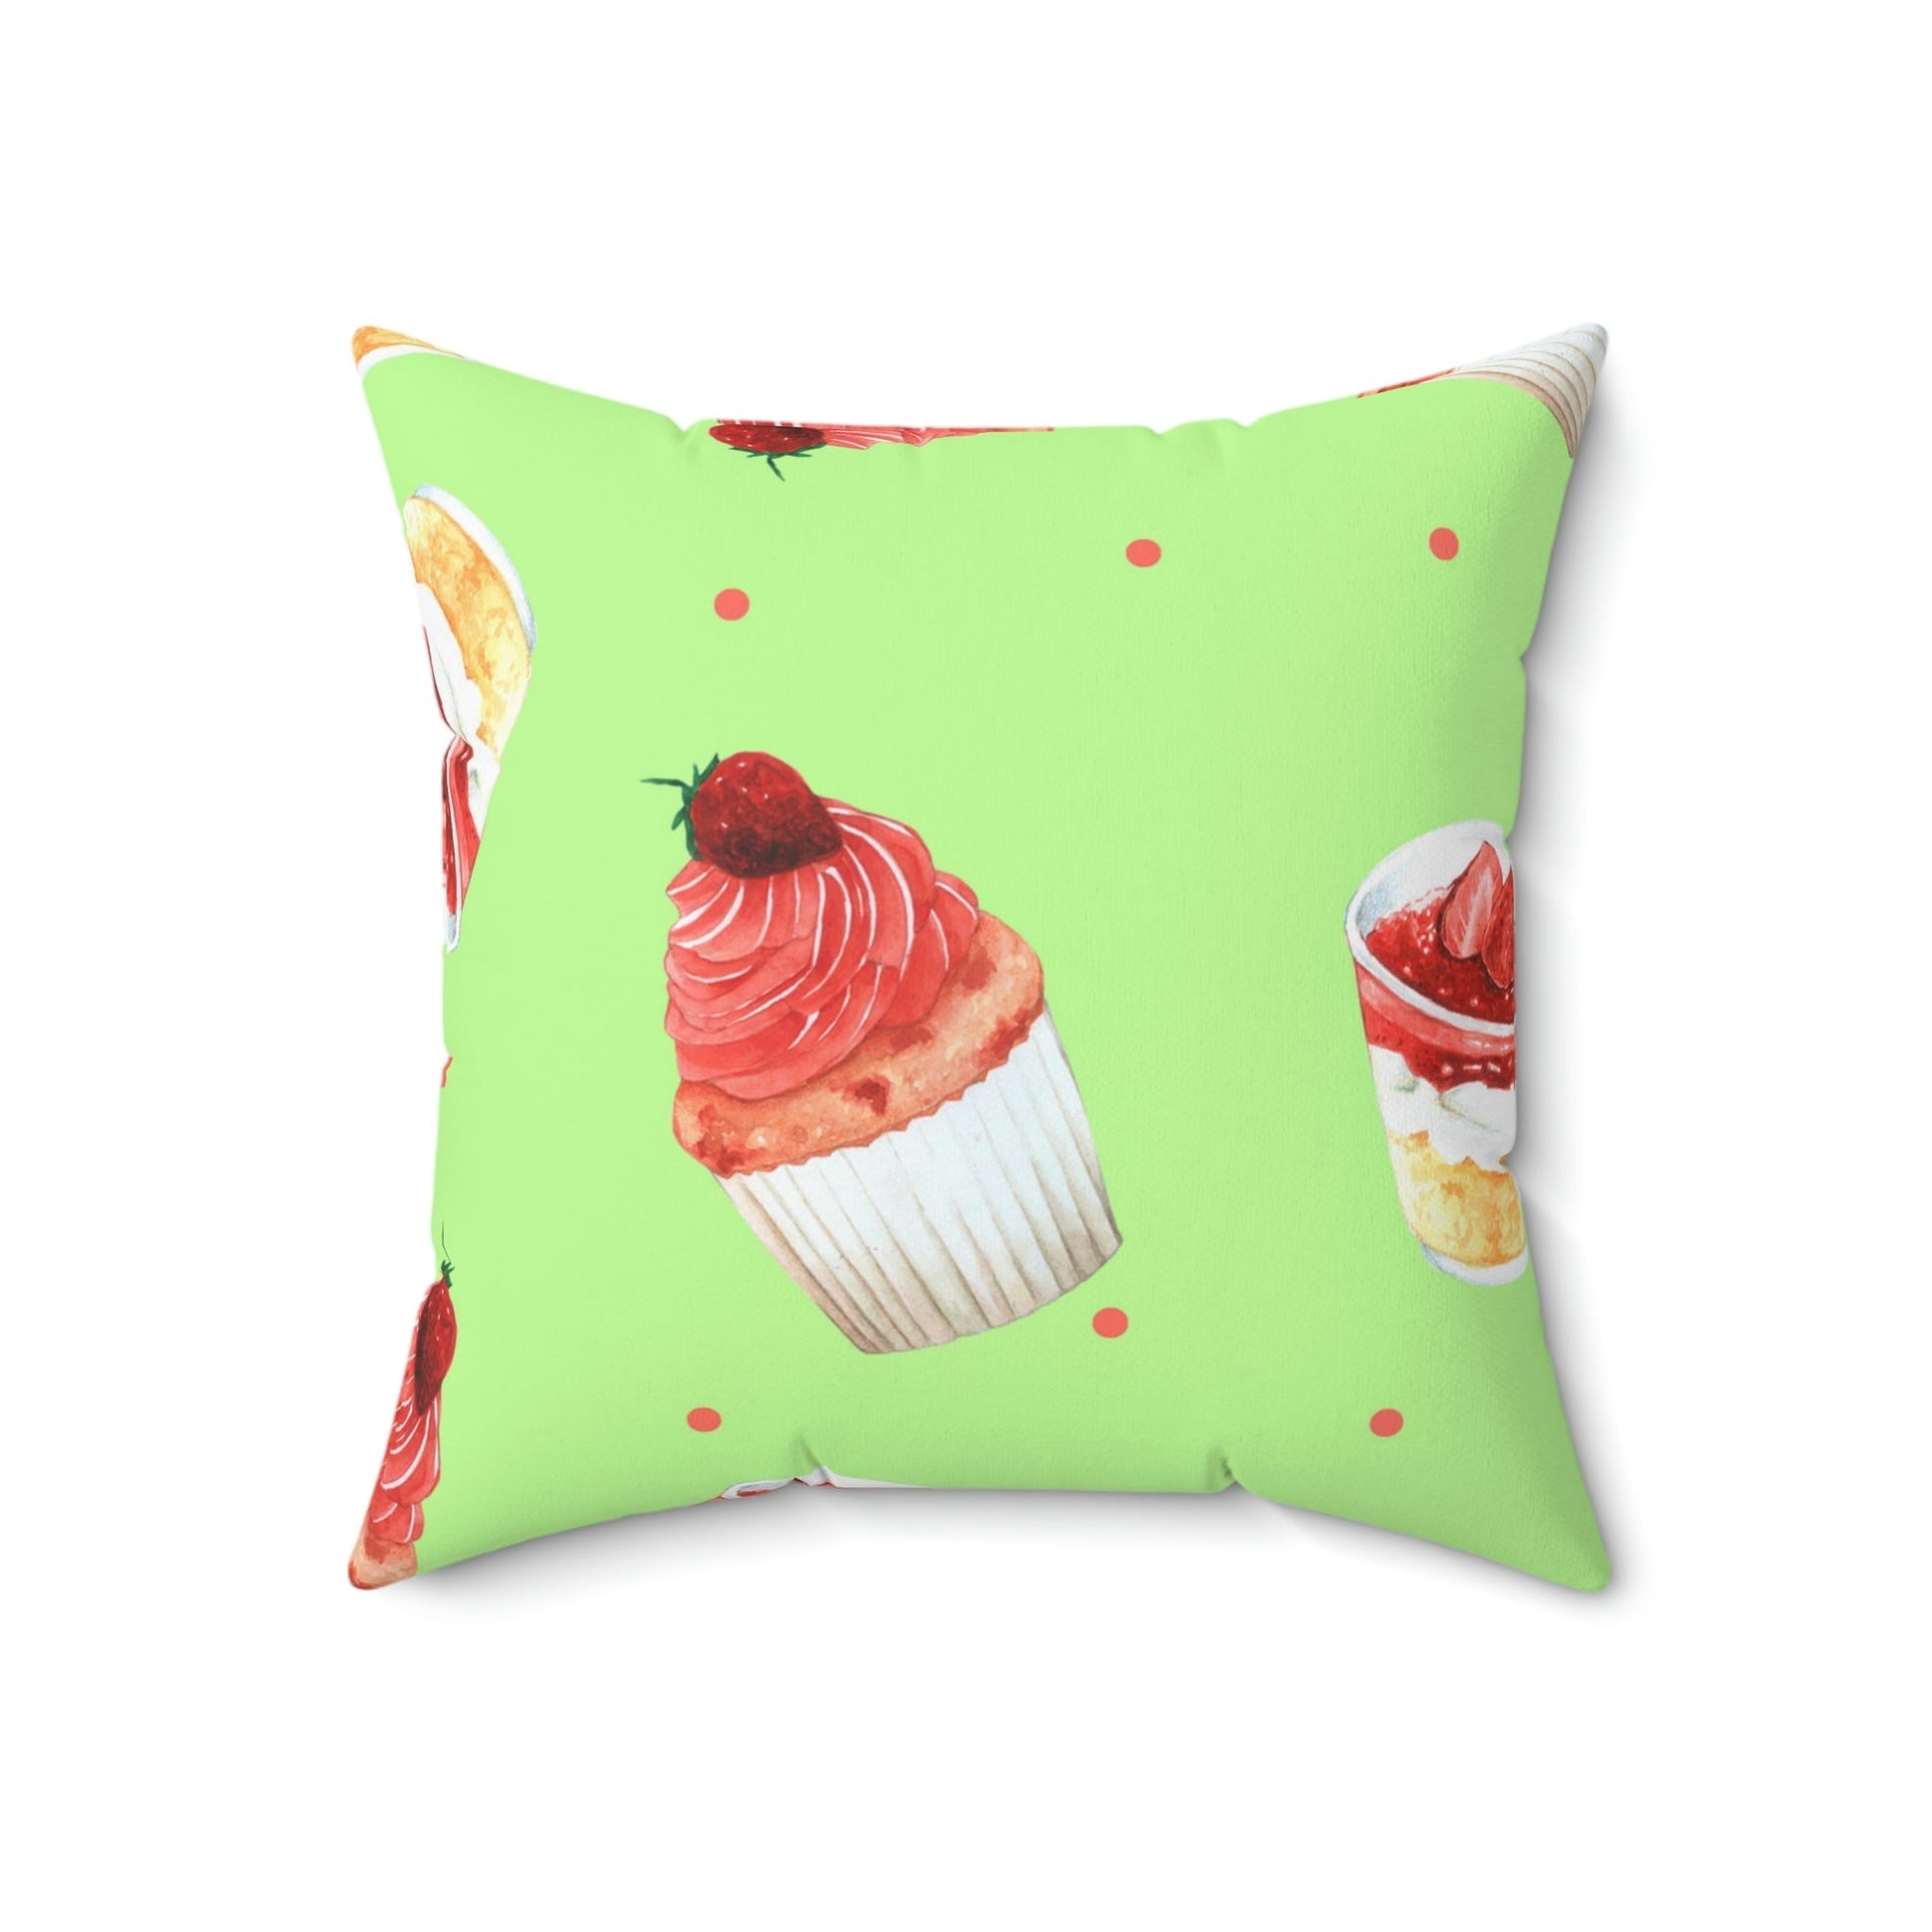 Mini Starwberry Shortcakes Square Pillow Home Decor Pink Sweetheart